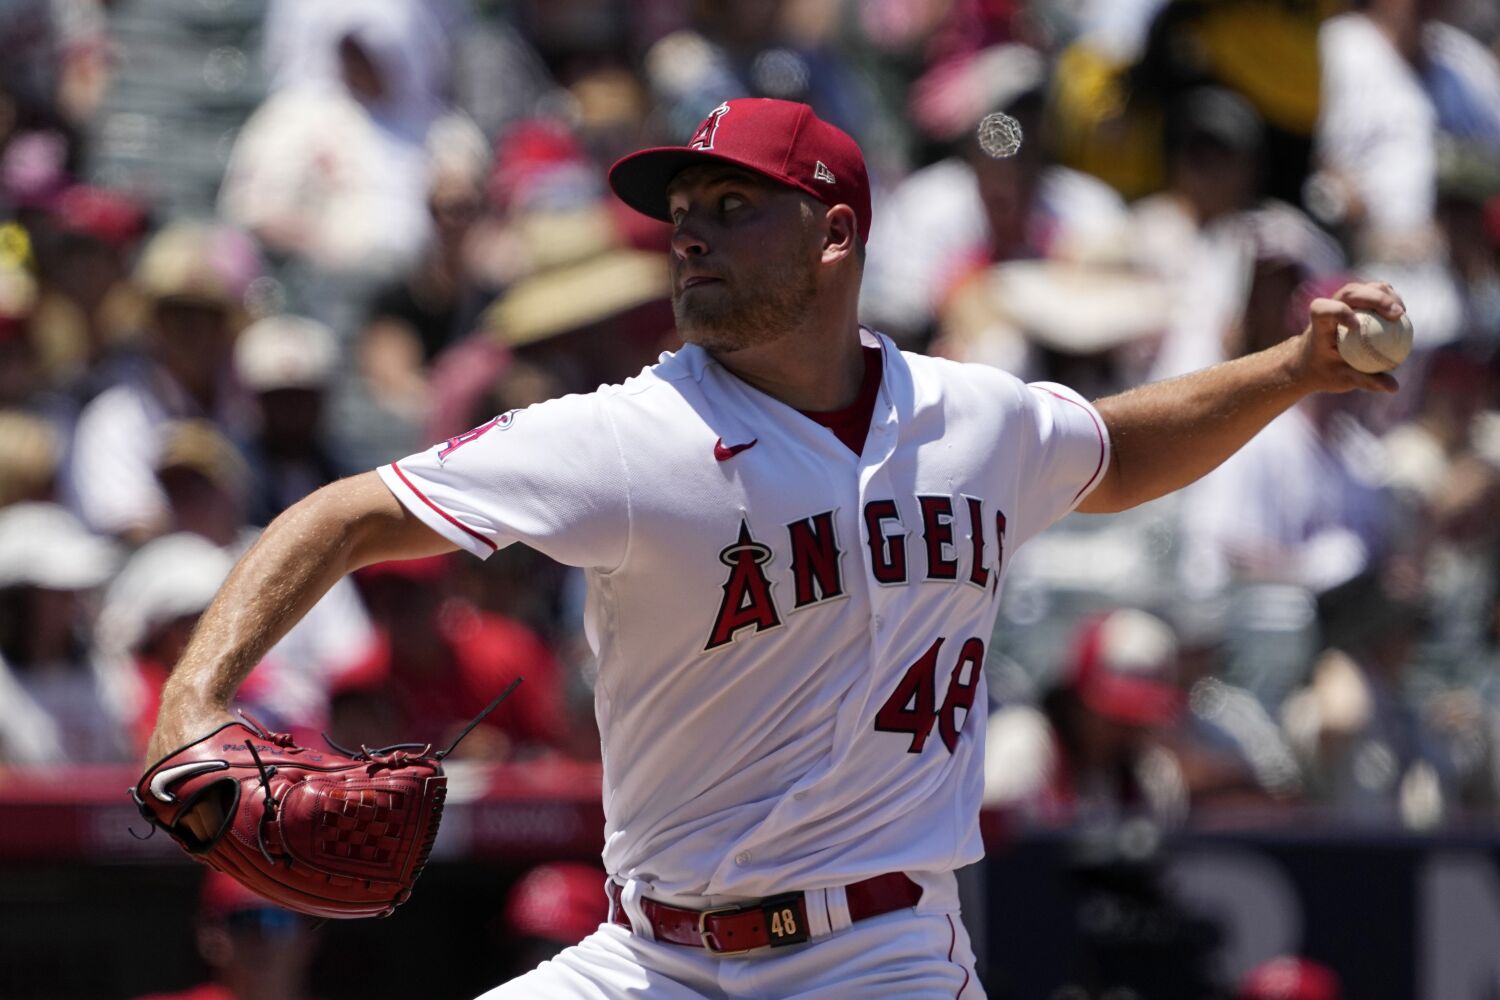 Elliott: Soft-spoken Reid Detmers has become quite a big deal for Angels' pitching staff